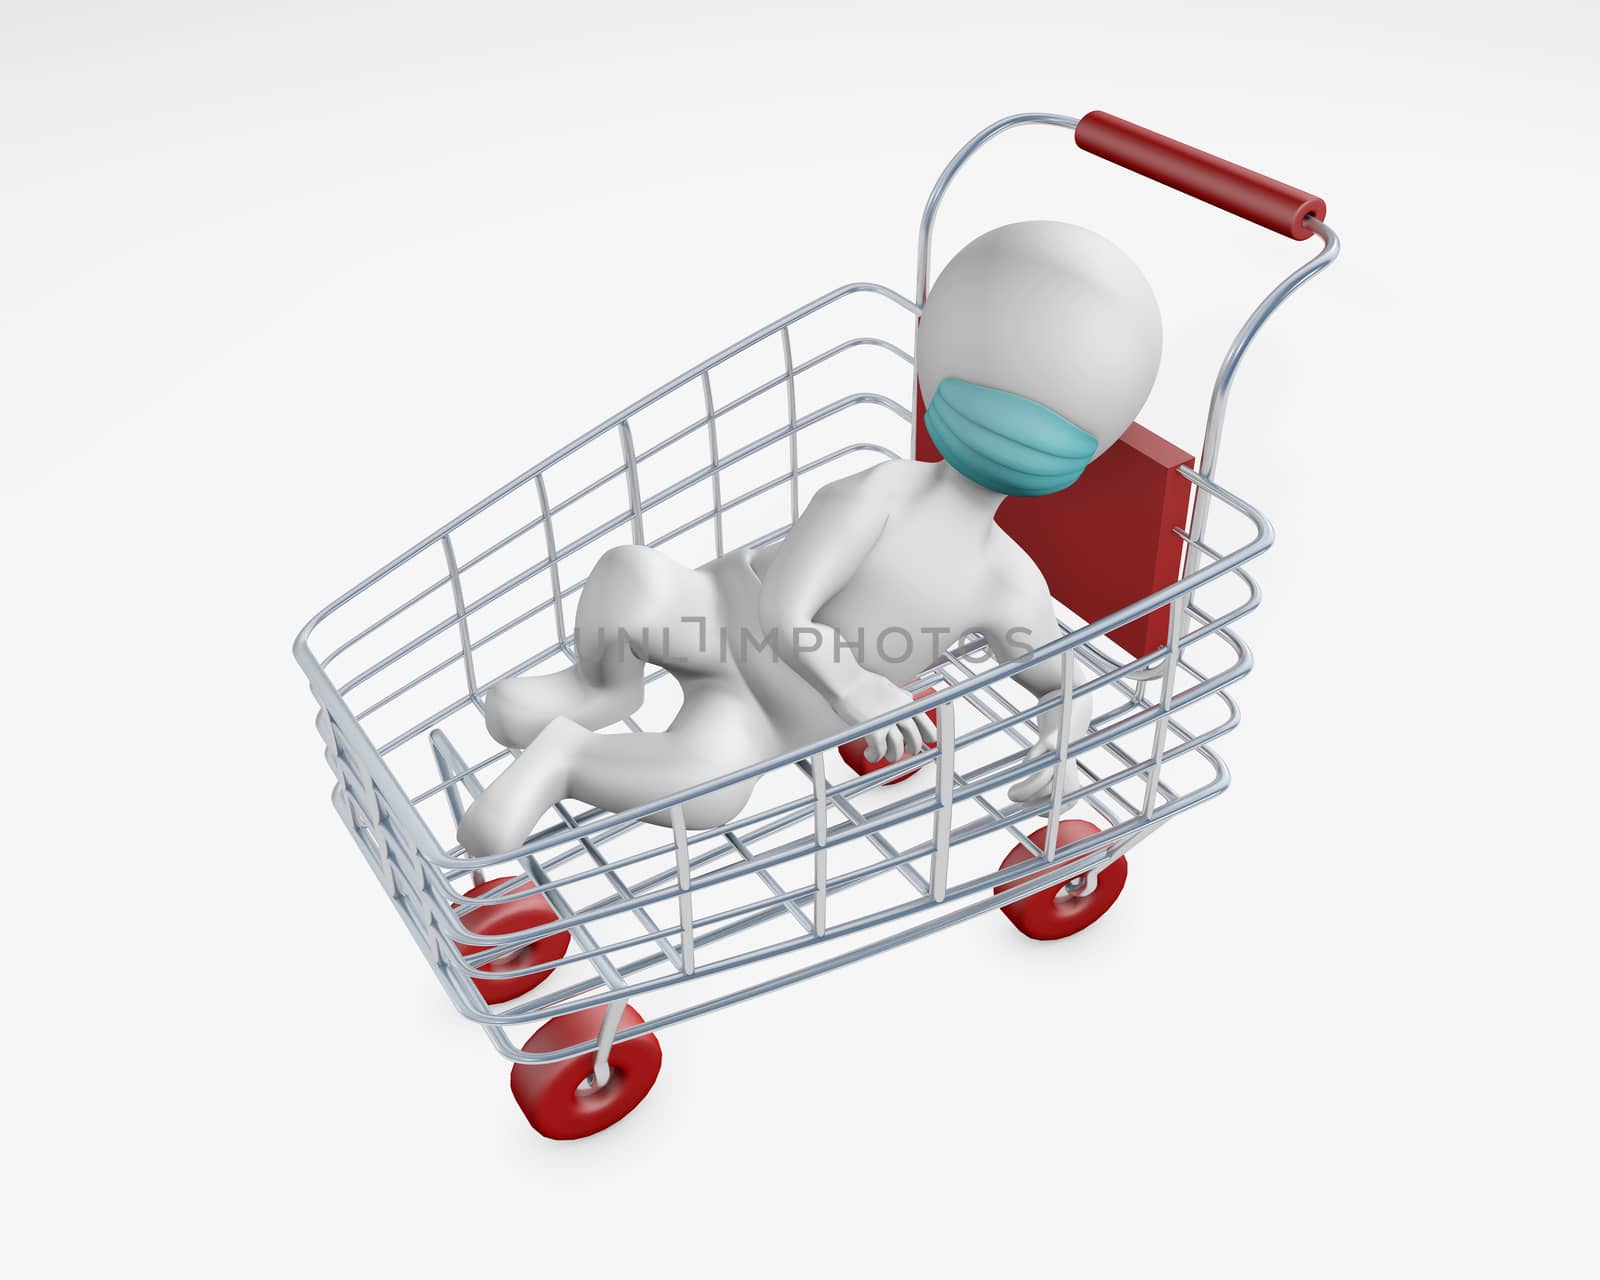 Fatty man with a mask in a shopping cart 3d rendering isolated on white